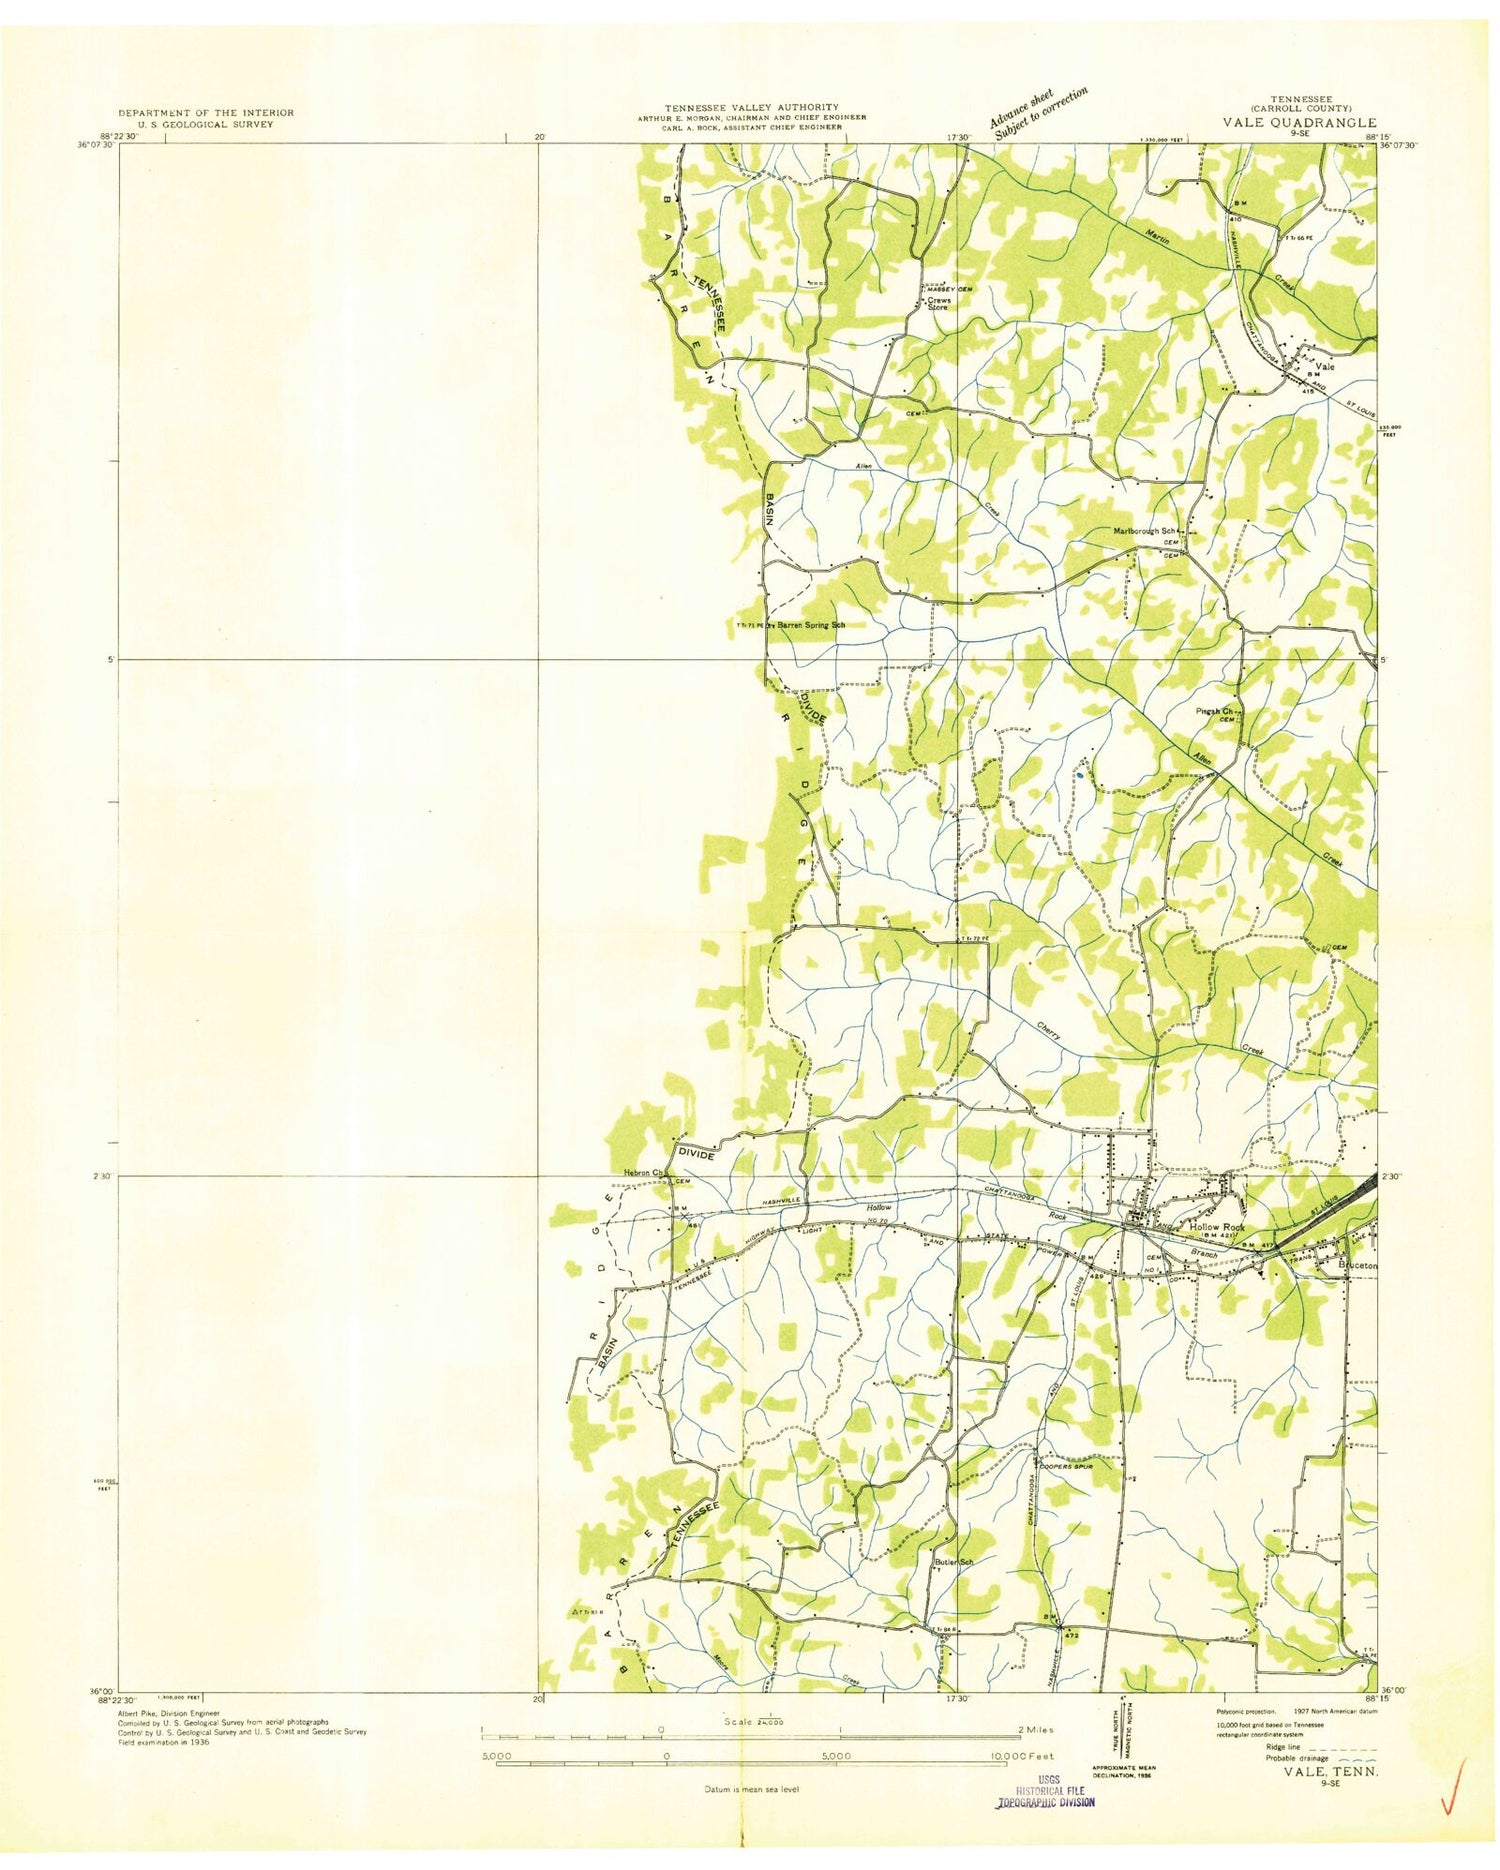 Classic USGS Vale Tennessee 7.5'x7.5' Topo Map Image